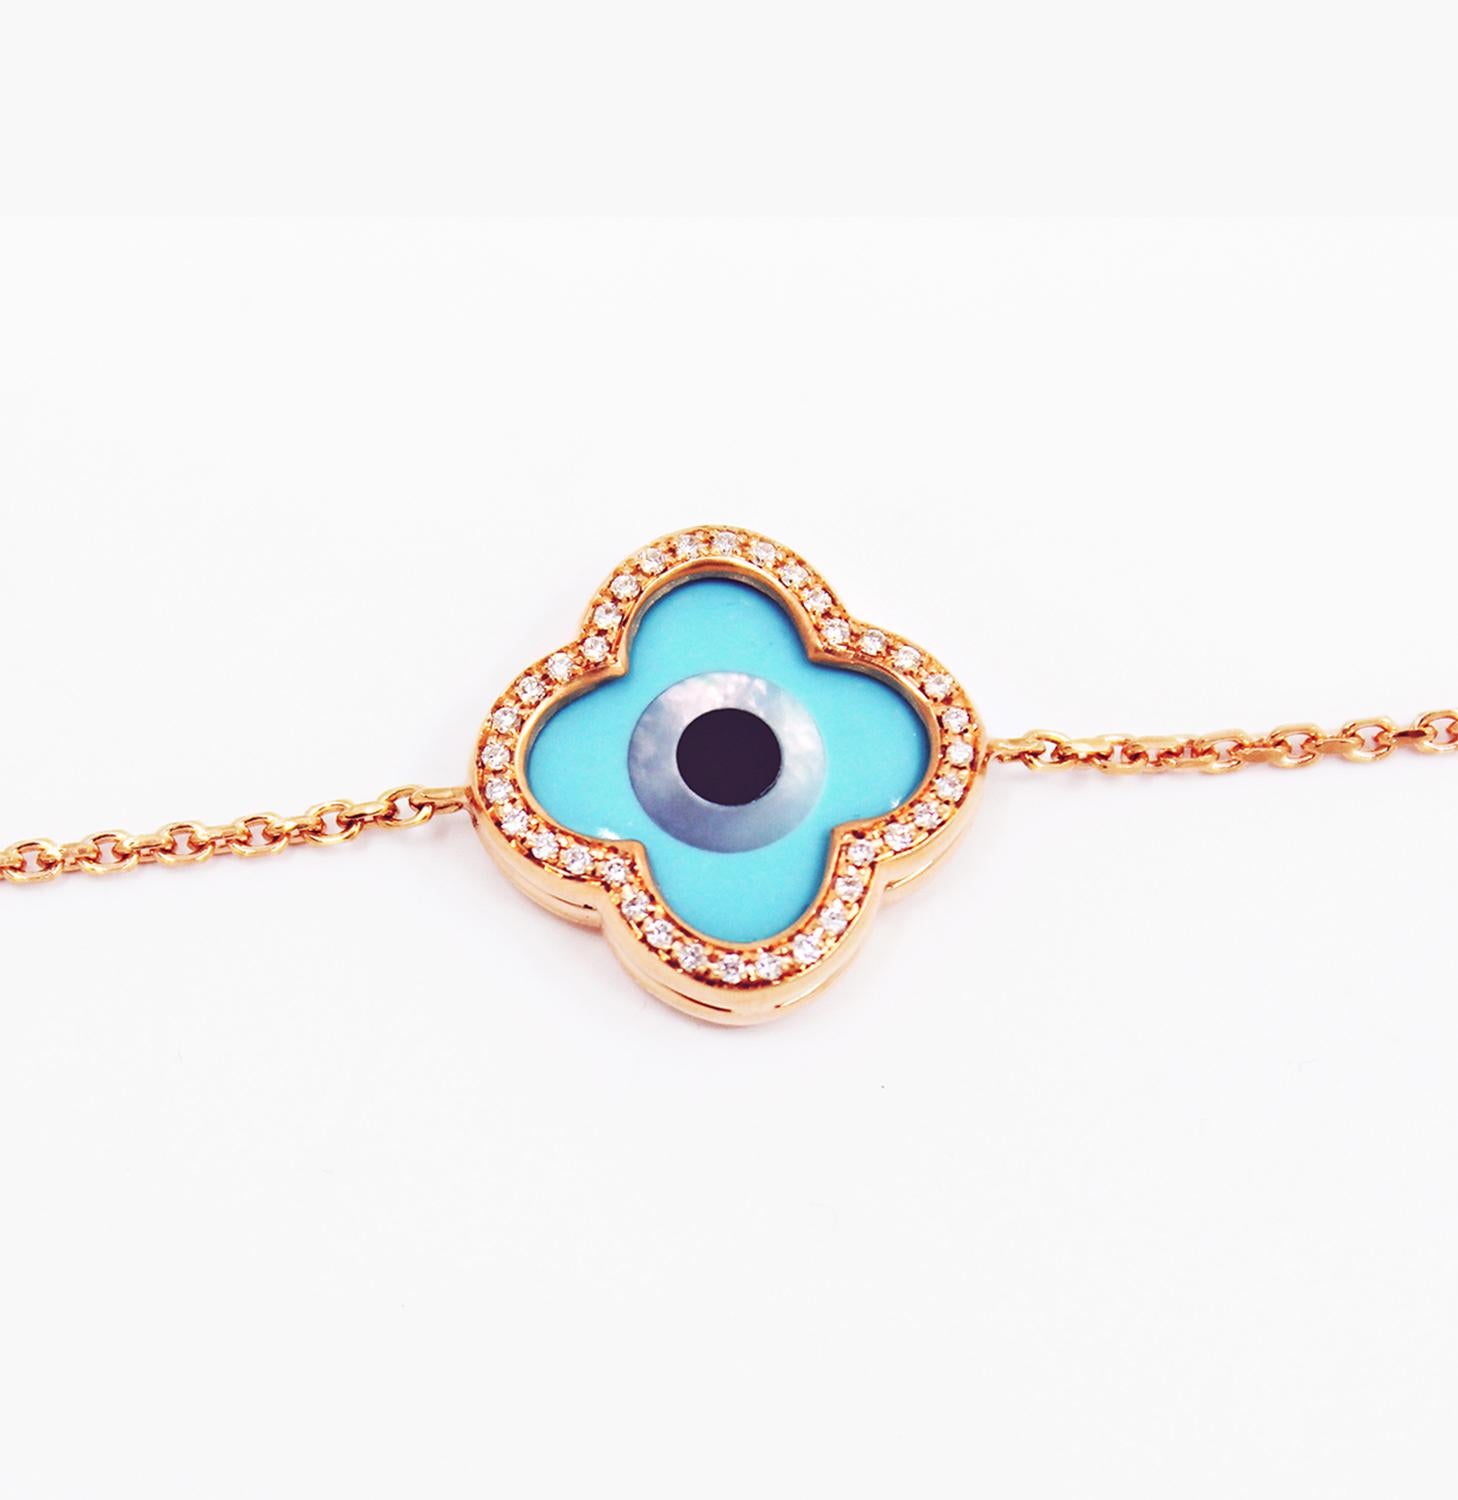 Modern 18 Karat Rose Gold Bracelet with Diamonds, Turquoise and Mother of Pearl Inlay For Sale